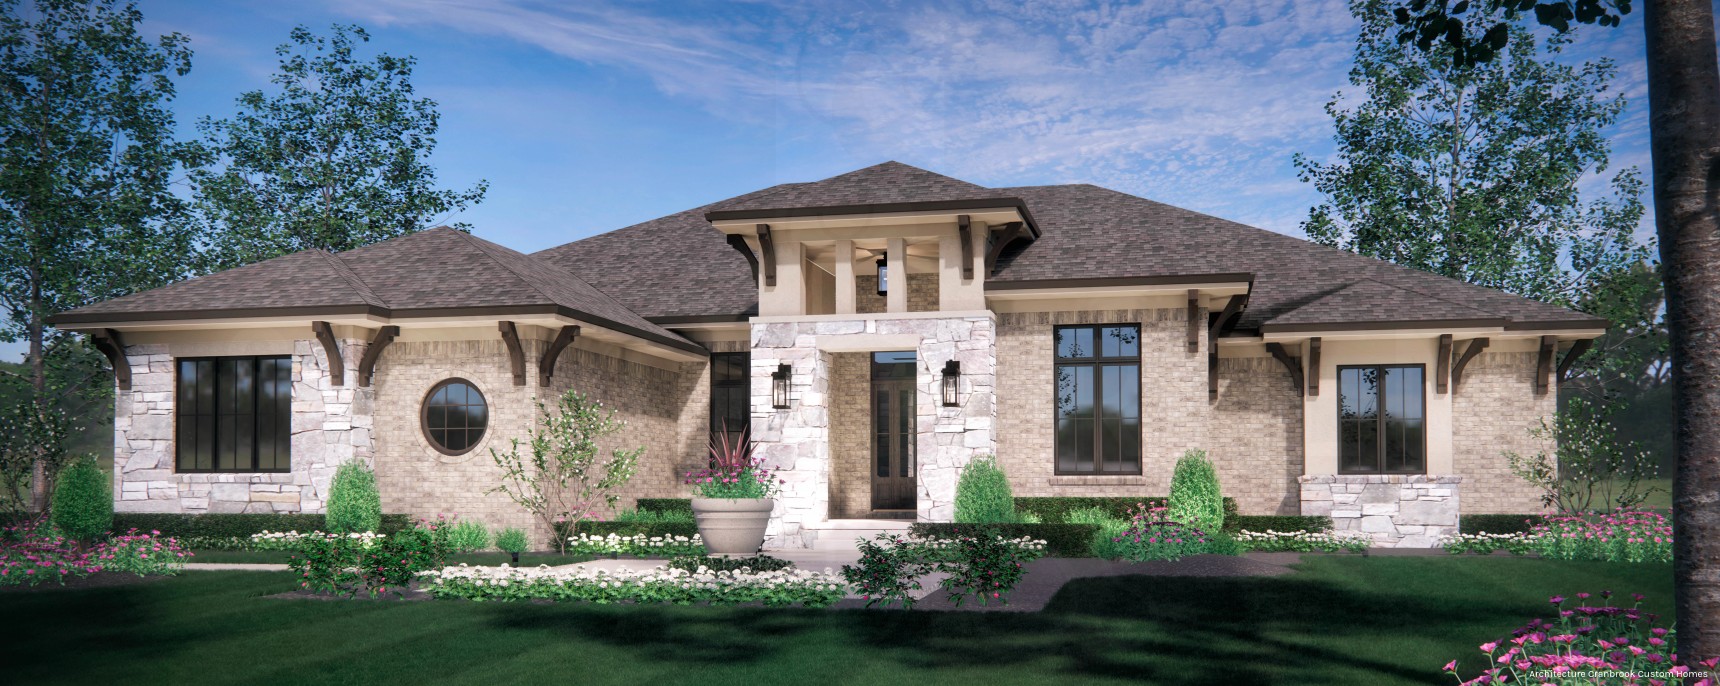 Tuscan Style Brick Ranch Rendering